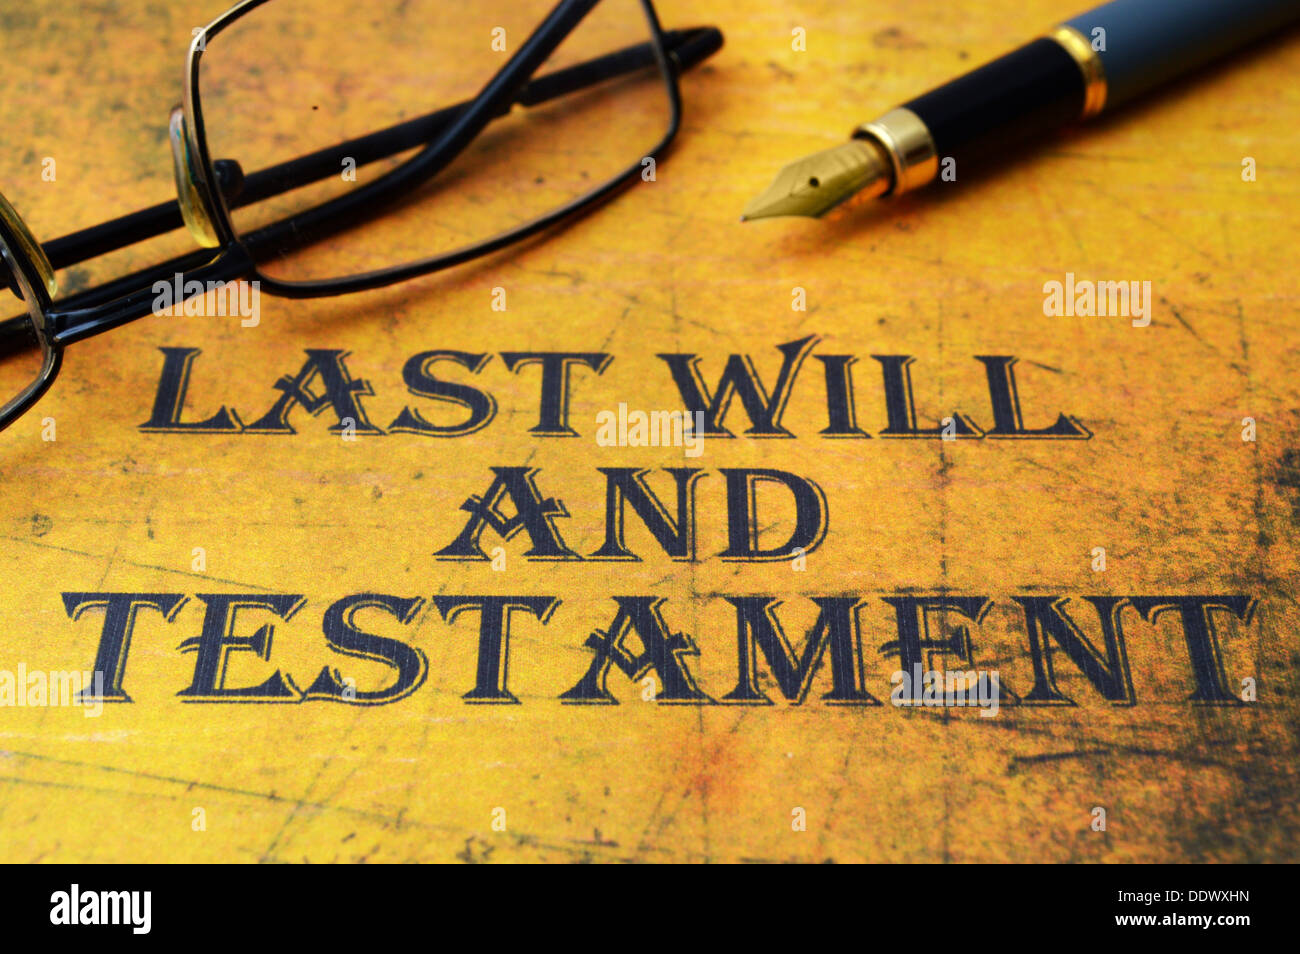 Last Will And Testament Text On Grunge Paper Stock Photo Alamy